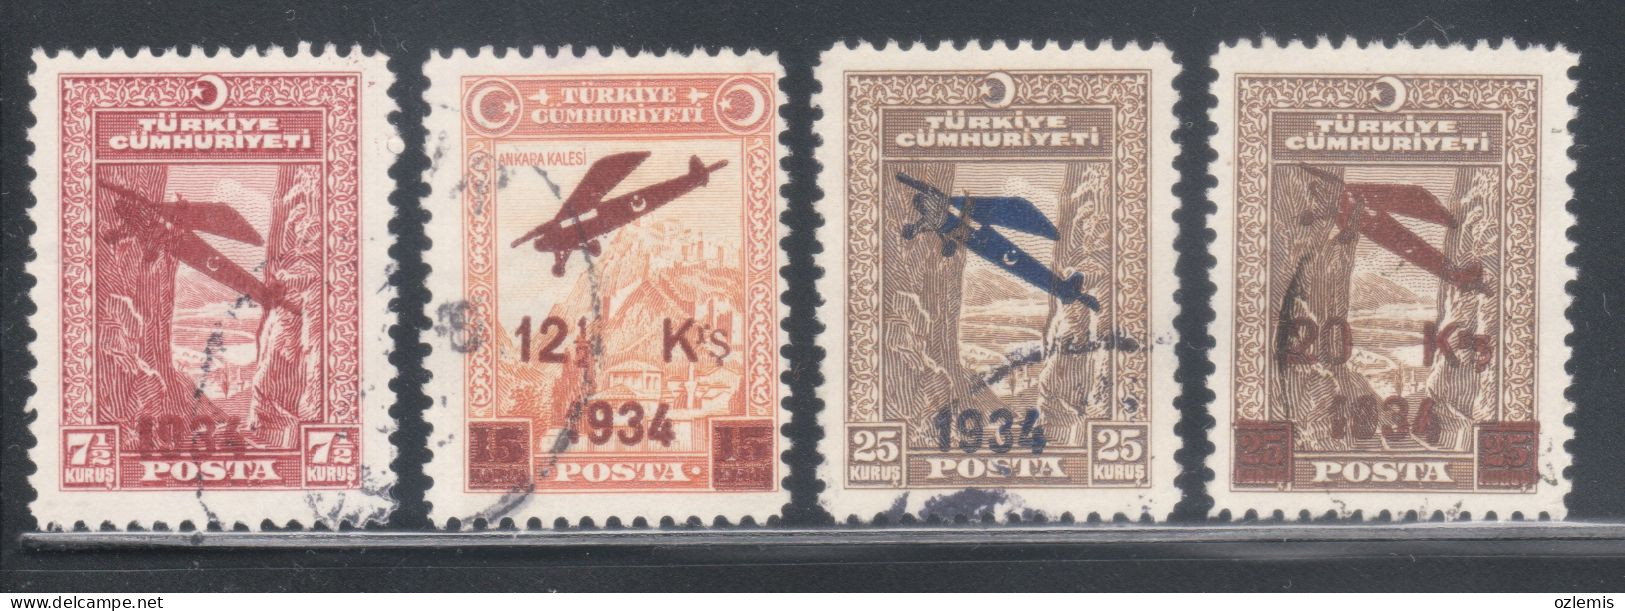 TURKEY,TURKEI,TURQUIE ,SURCHARGED AIRMAIL STAMPS FIRST ISSUE ,USED STAMPS ,1934 - Used Stamps